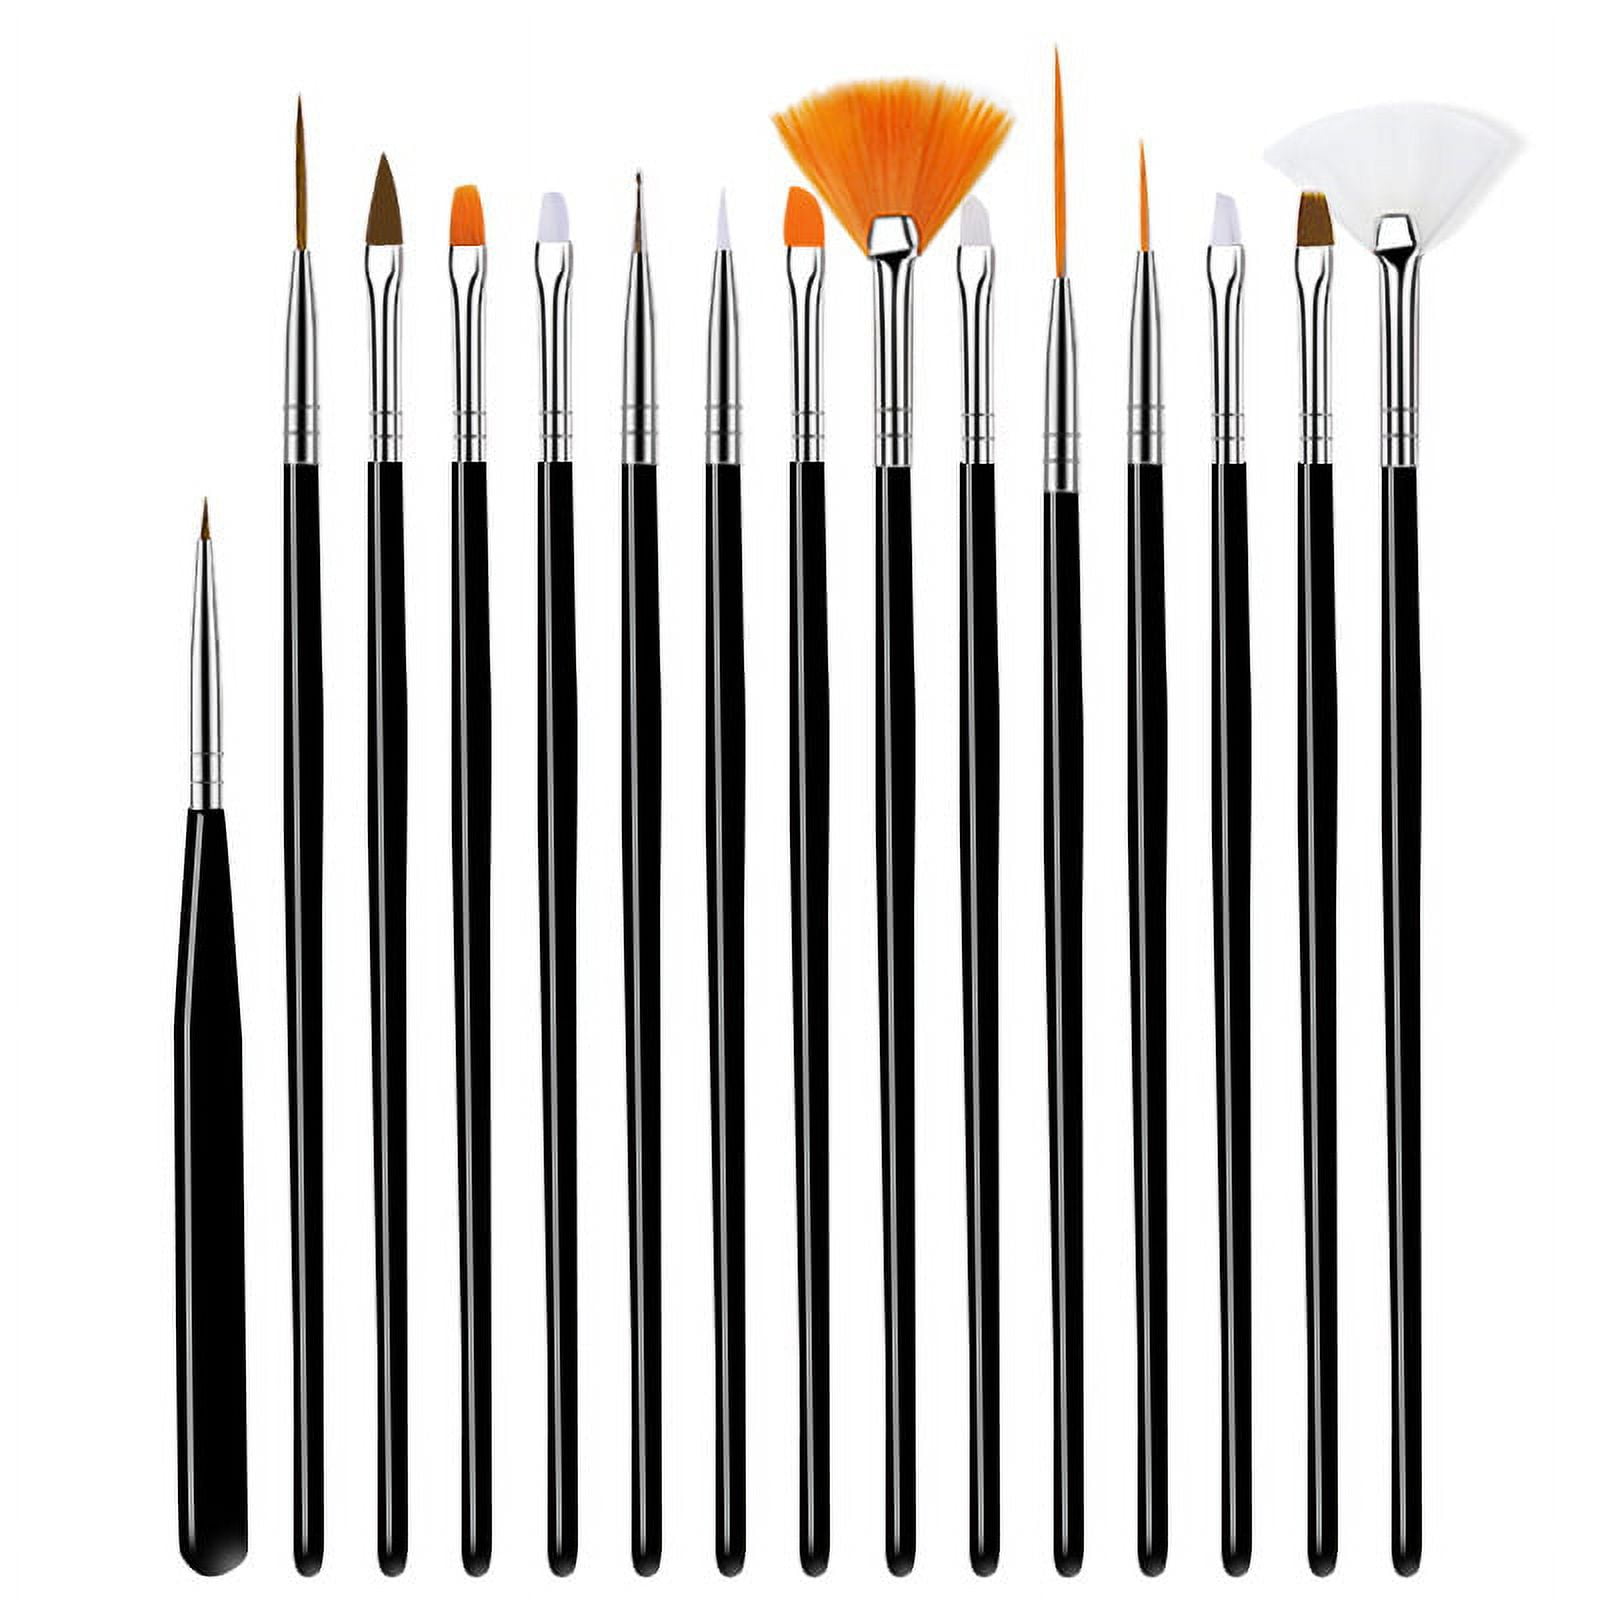 Nail Art Brush Tool Set - Pack of 15 Pieces